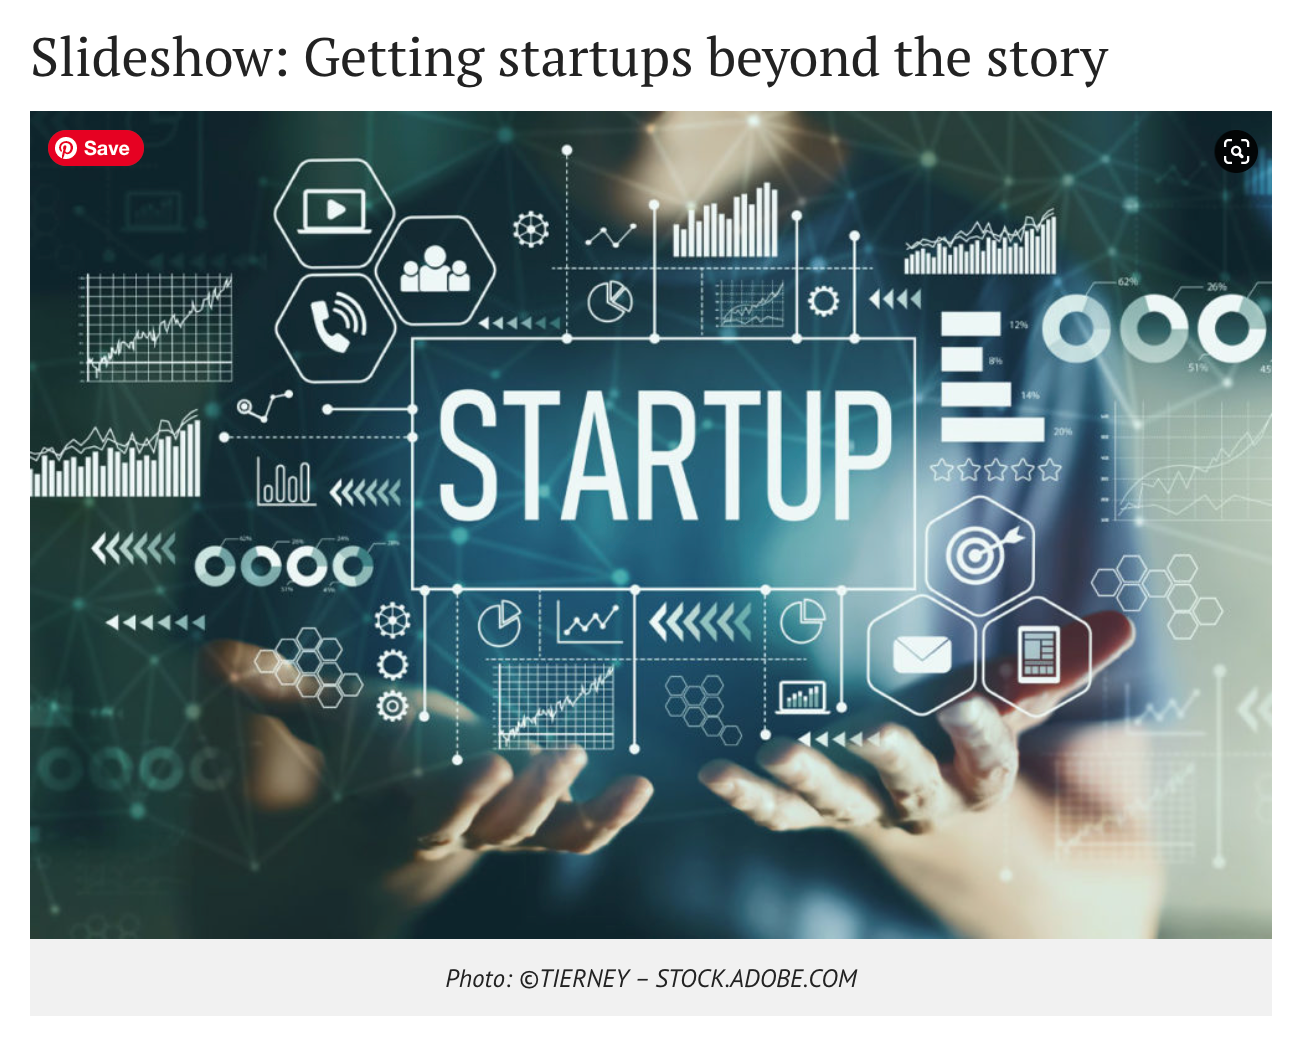 Food Business News: Getting Startups Behind the Story